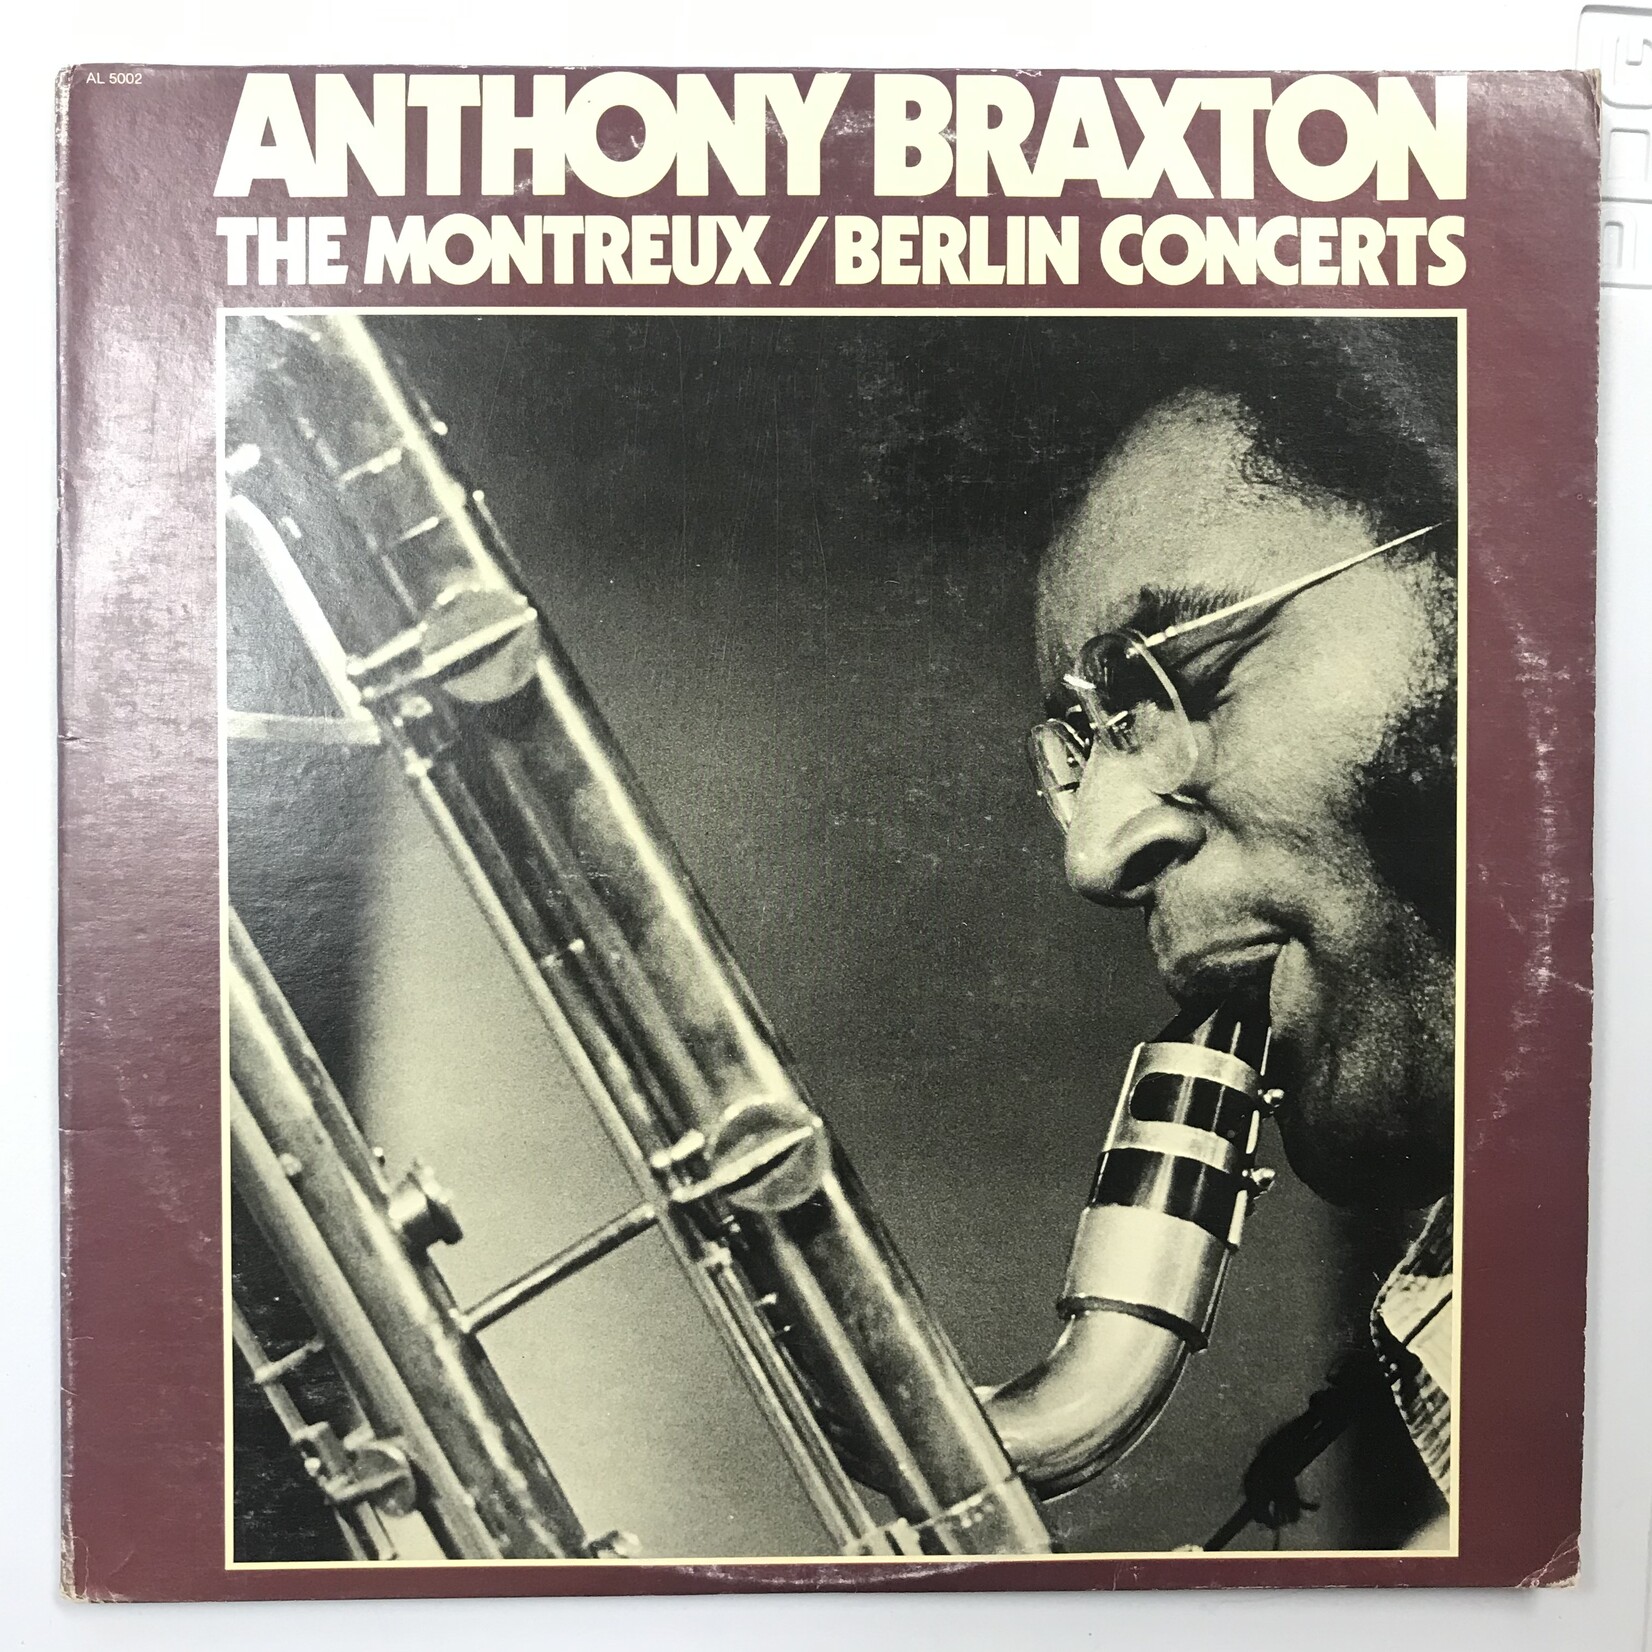 Anthony Braxton - The Montreux /Berlin Concert - Vinyl LP (USED)